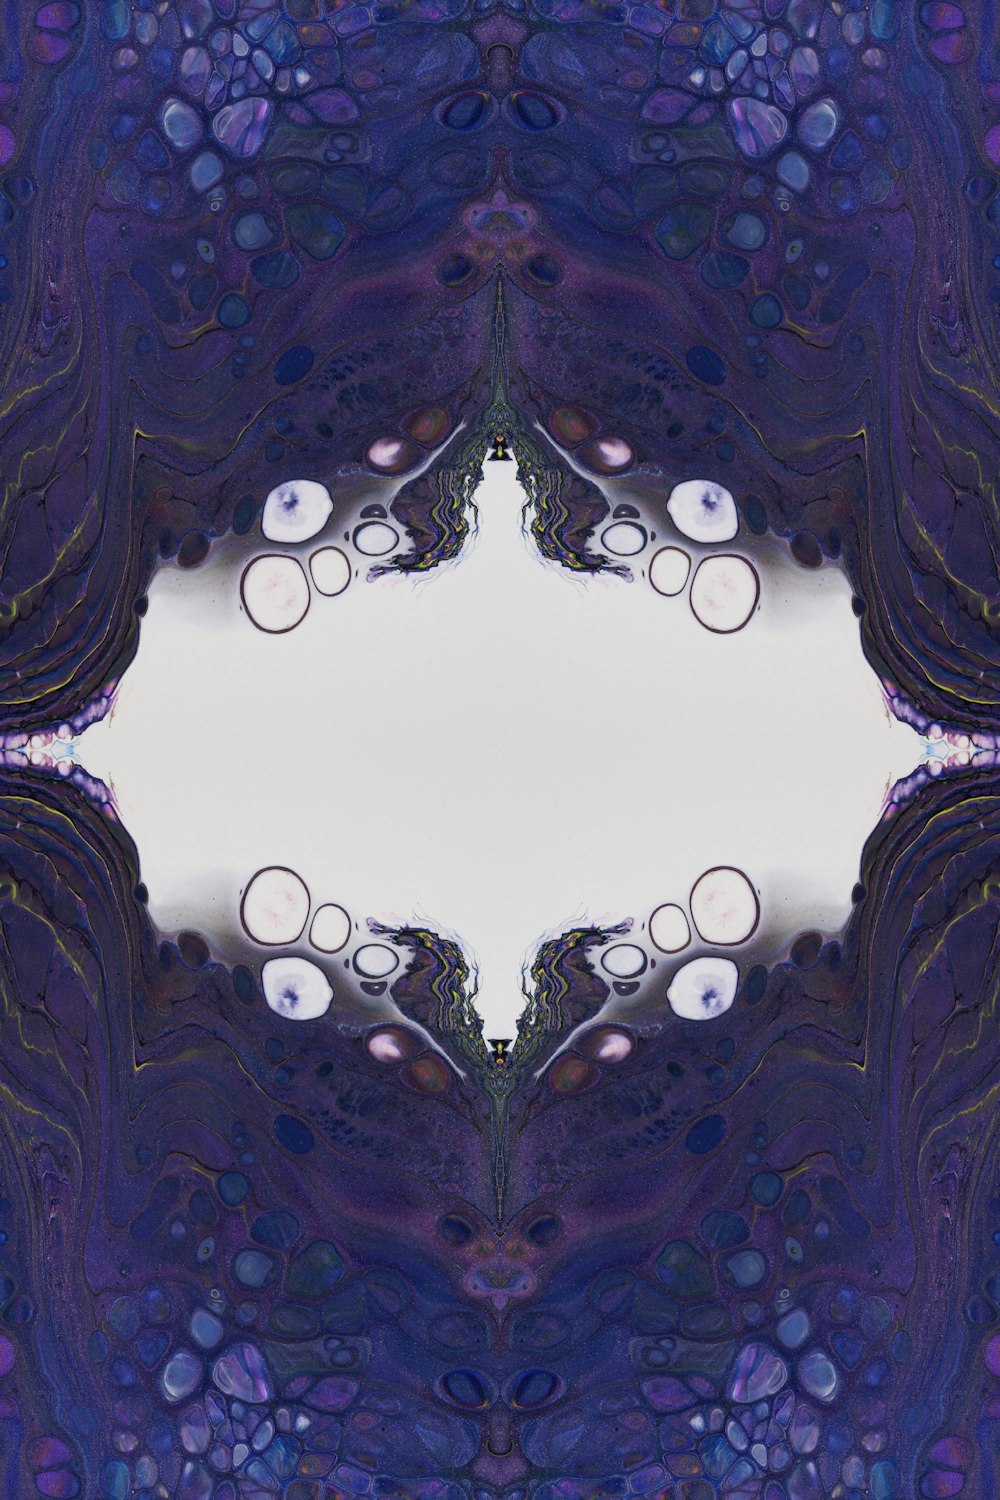 an abstract image of a blue and purple pattern